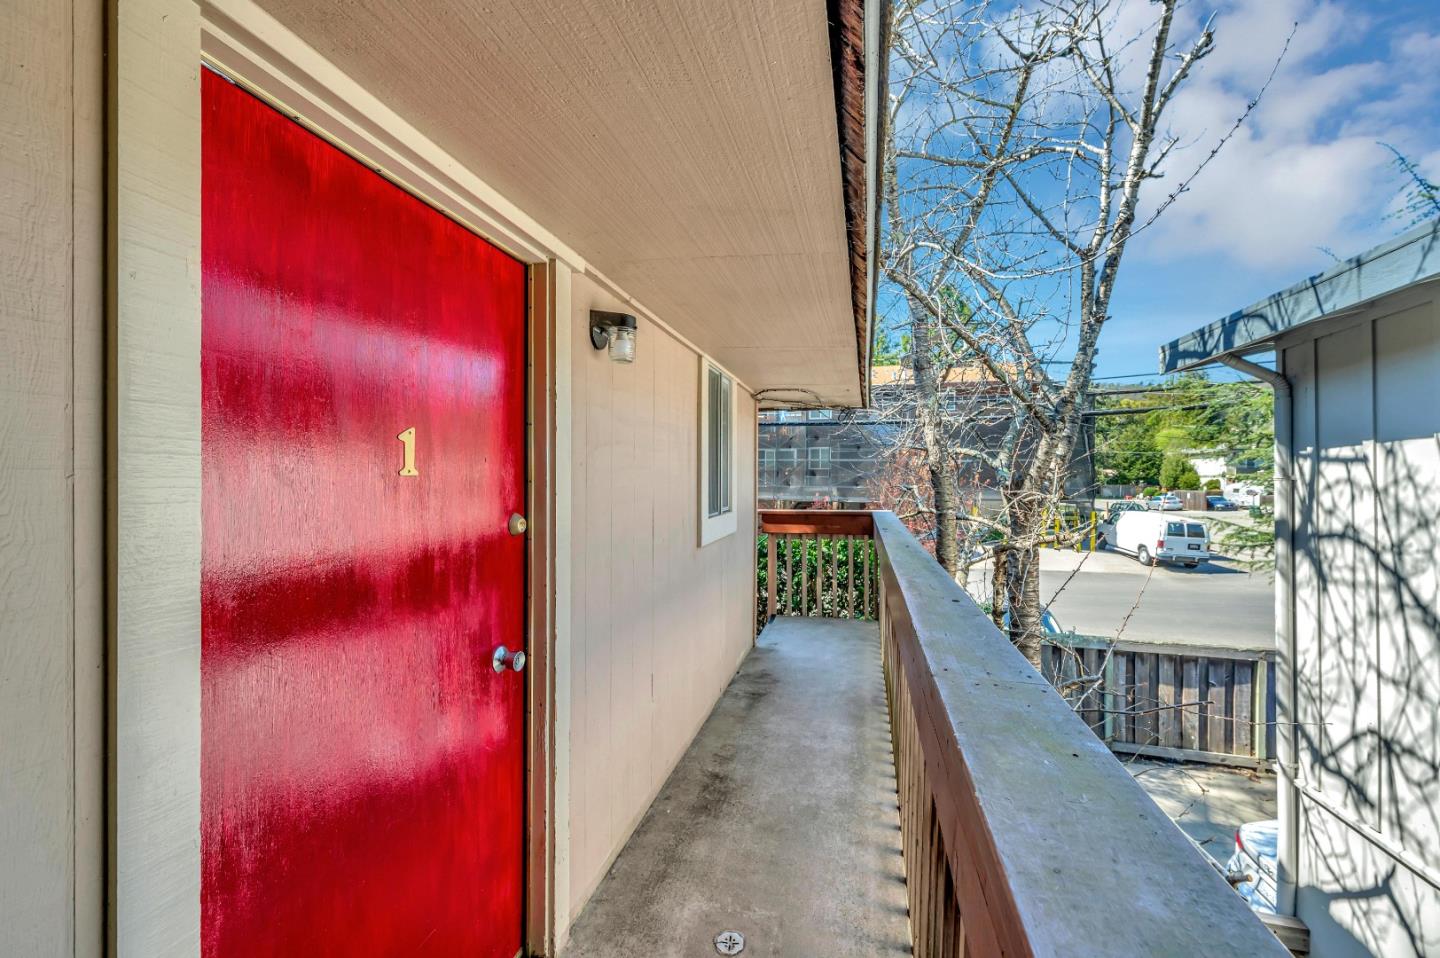 407 Maple St, Mill Valley, CA 94941